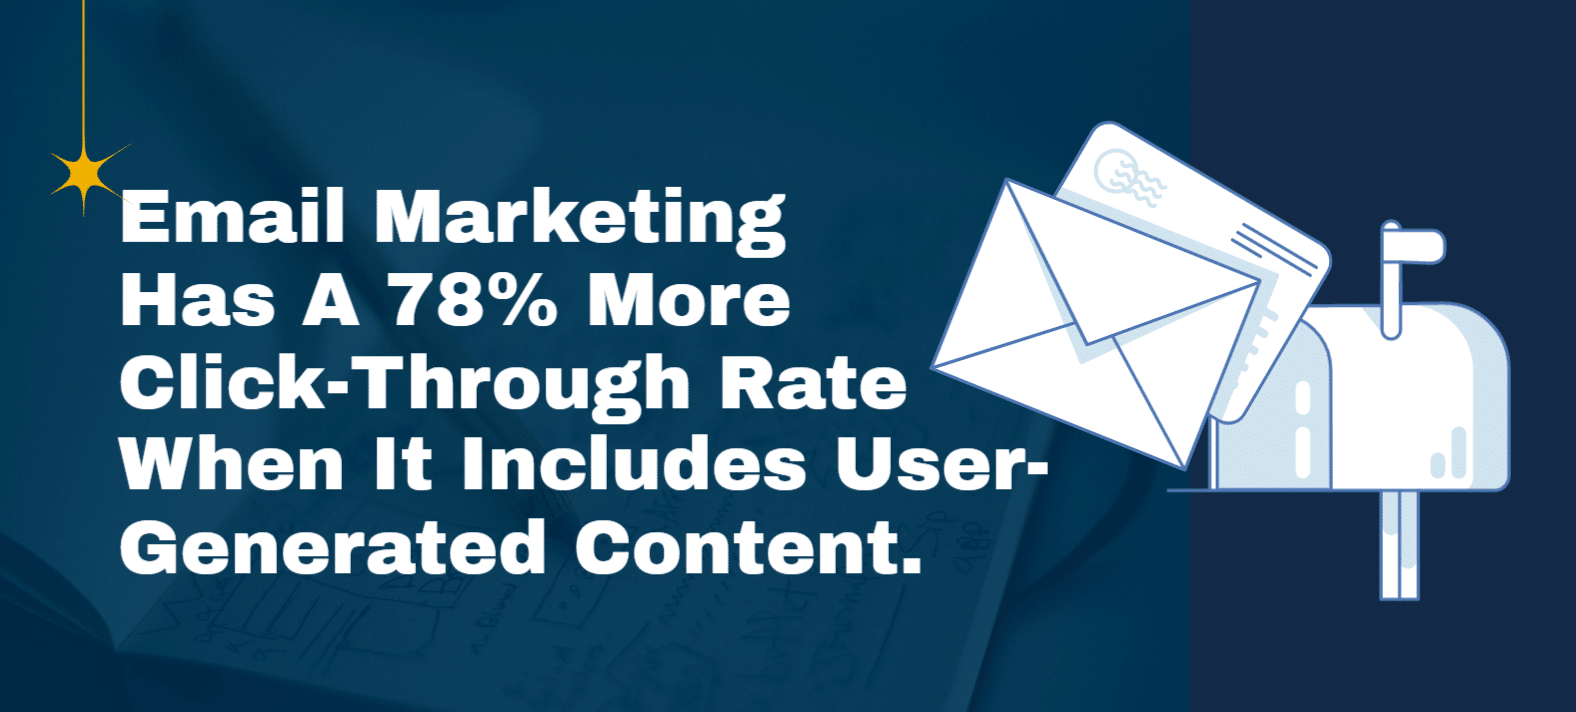 user generated content stats for email marketing